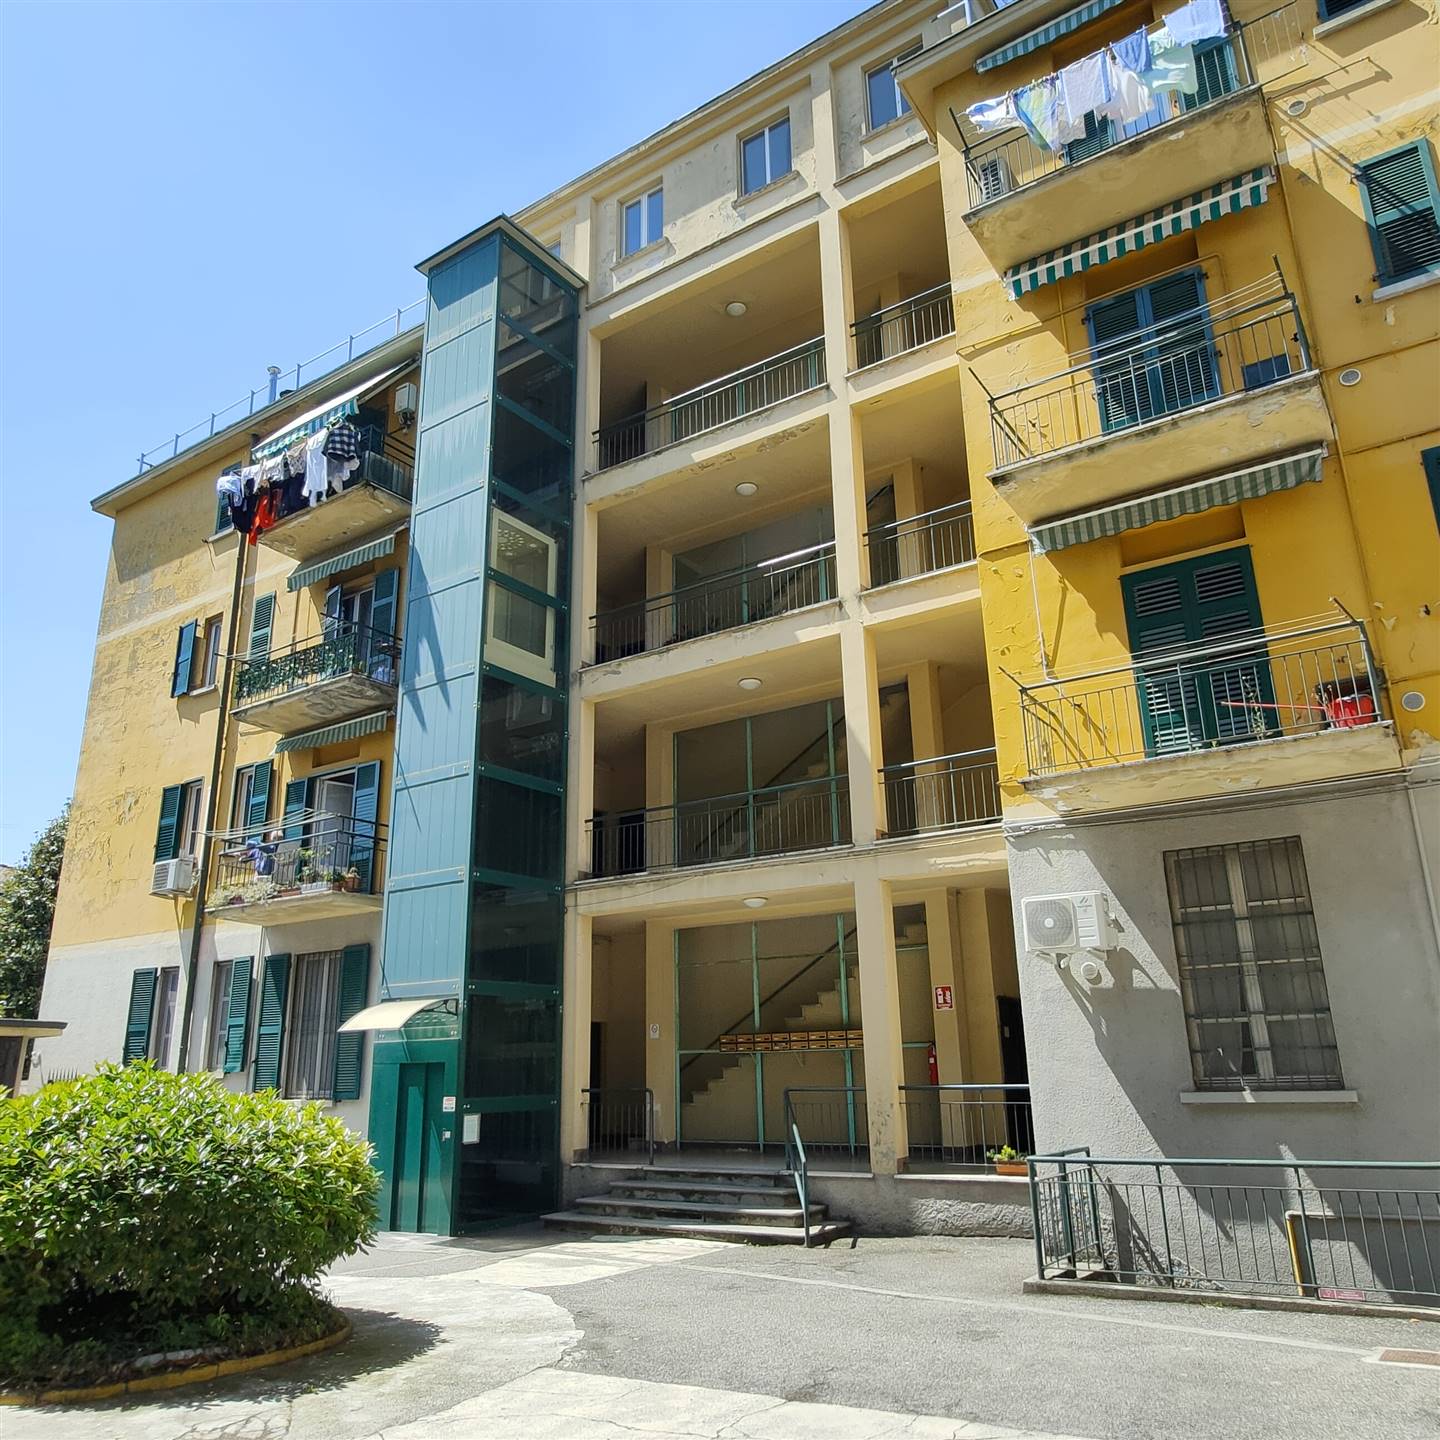 SAN GRATO, LODI, Apartment for sale of 69 Sq. mt., Habitable, Heating Centralized, Energetic class: G, Epi: 195,66 kwh/m2 year, placed at 2° on 3, 